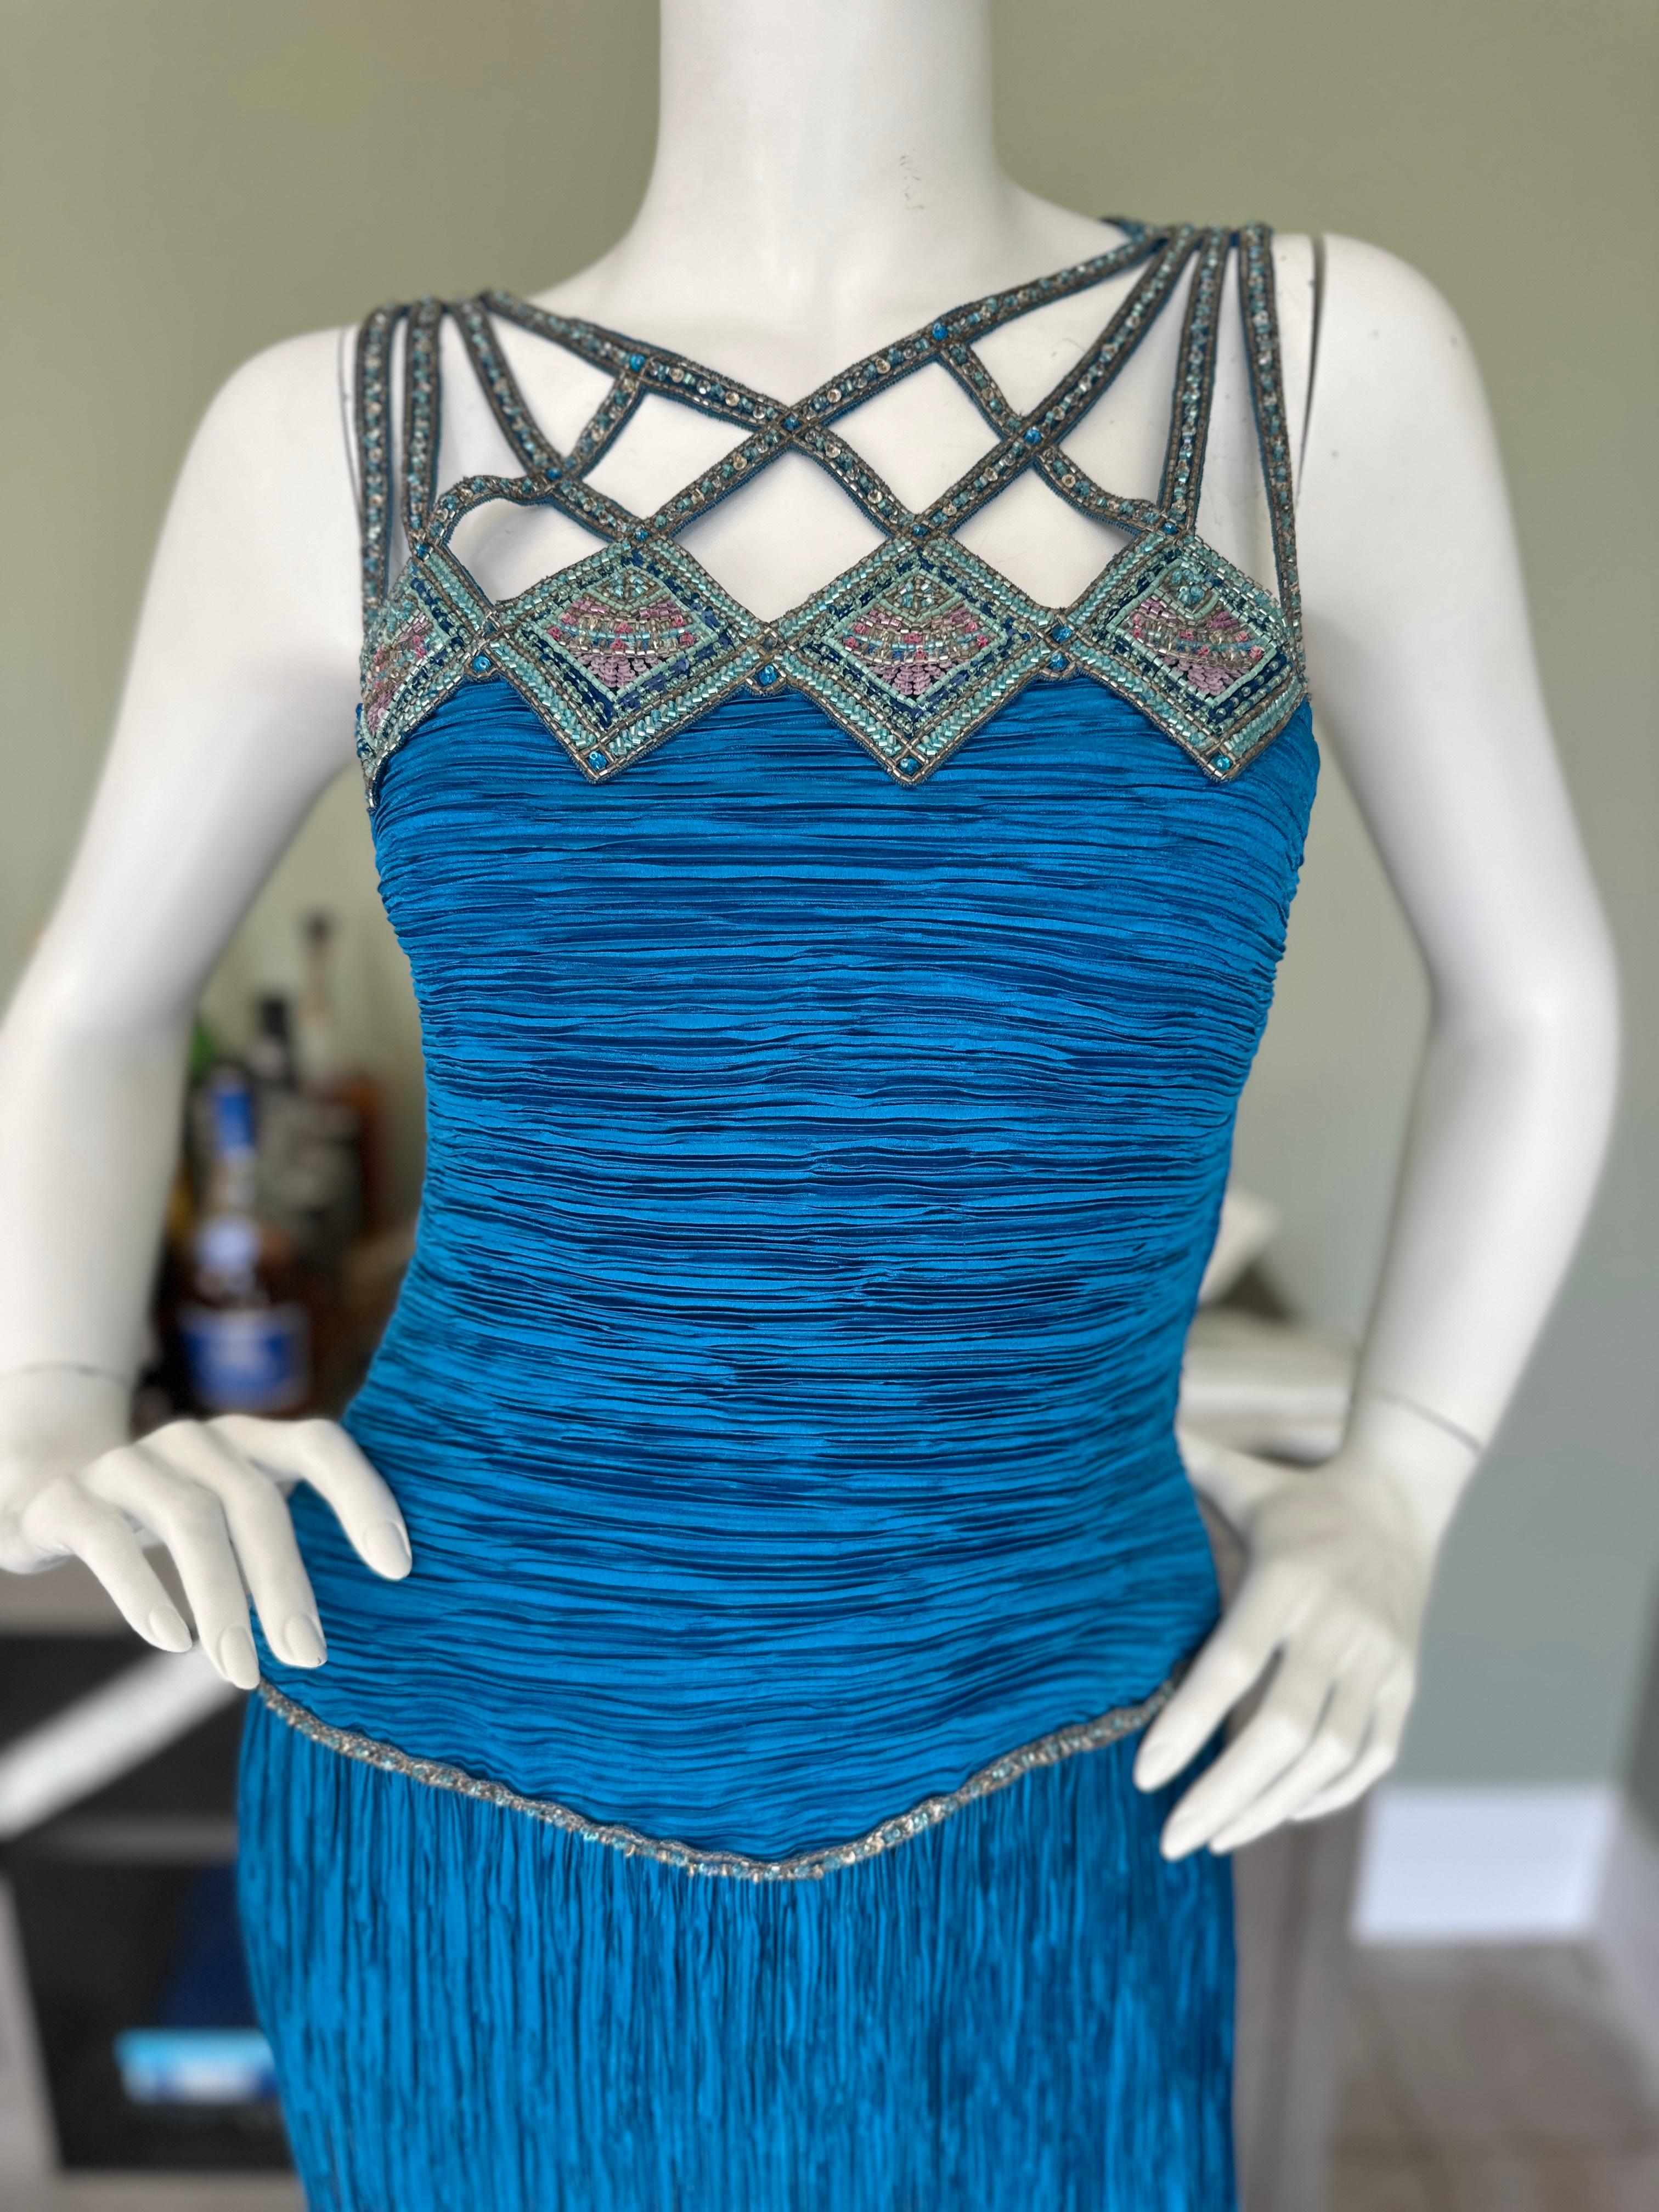 Mary McFadden Couture Vintage 1980's Beaded Sleeveless Evening Dress
 This is just so pretty, please use the zoom feature to see details.
 Size 6
 Bust 32